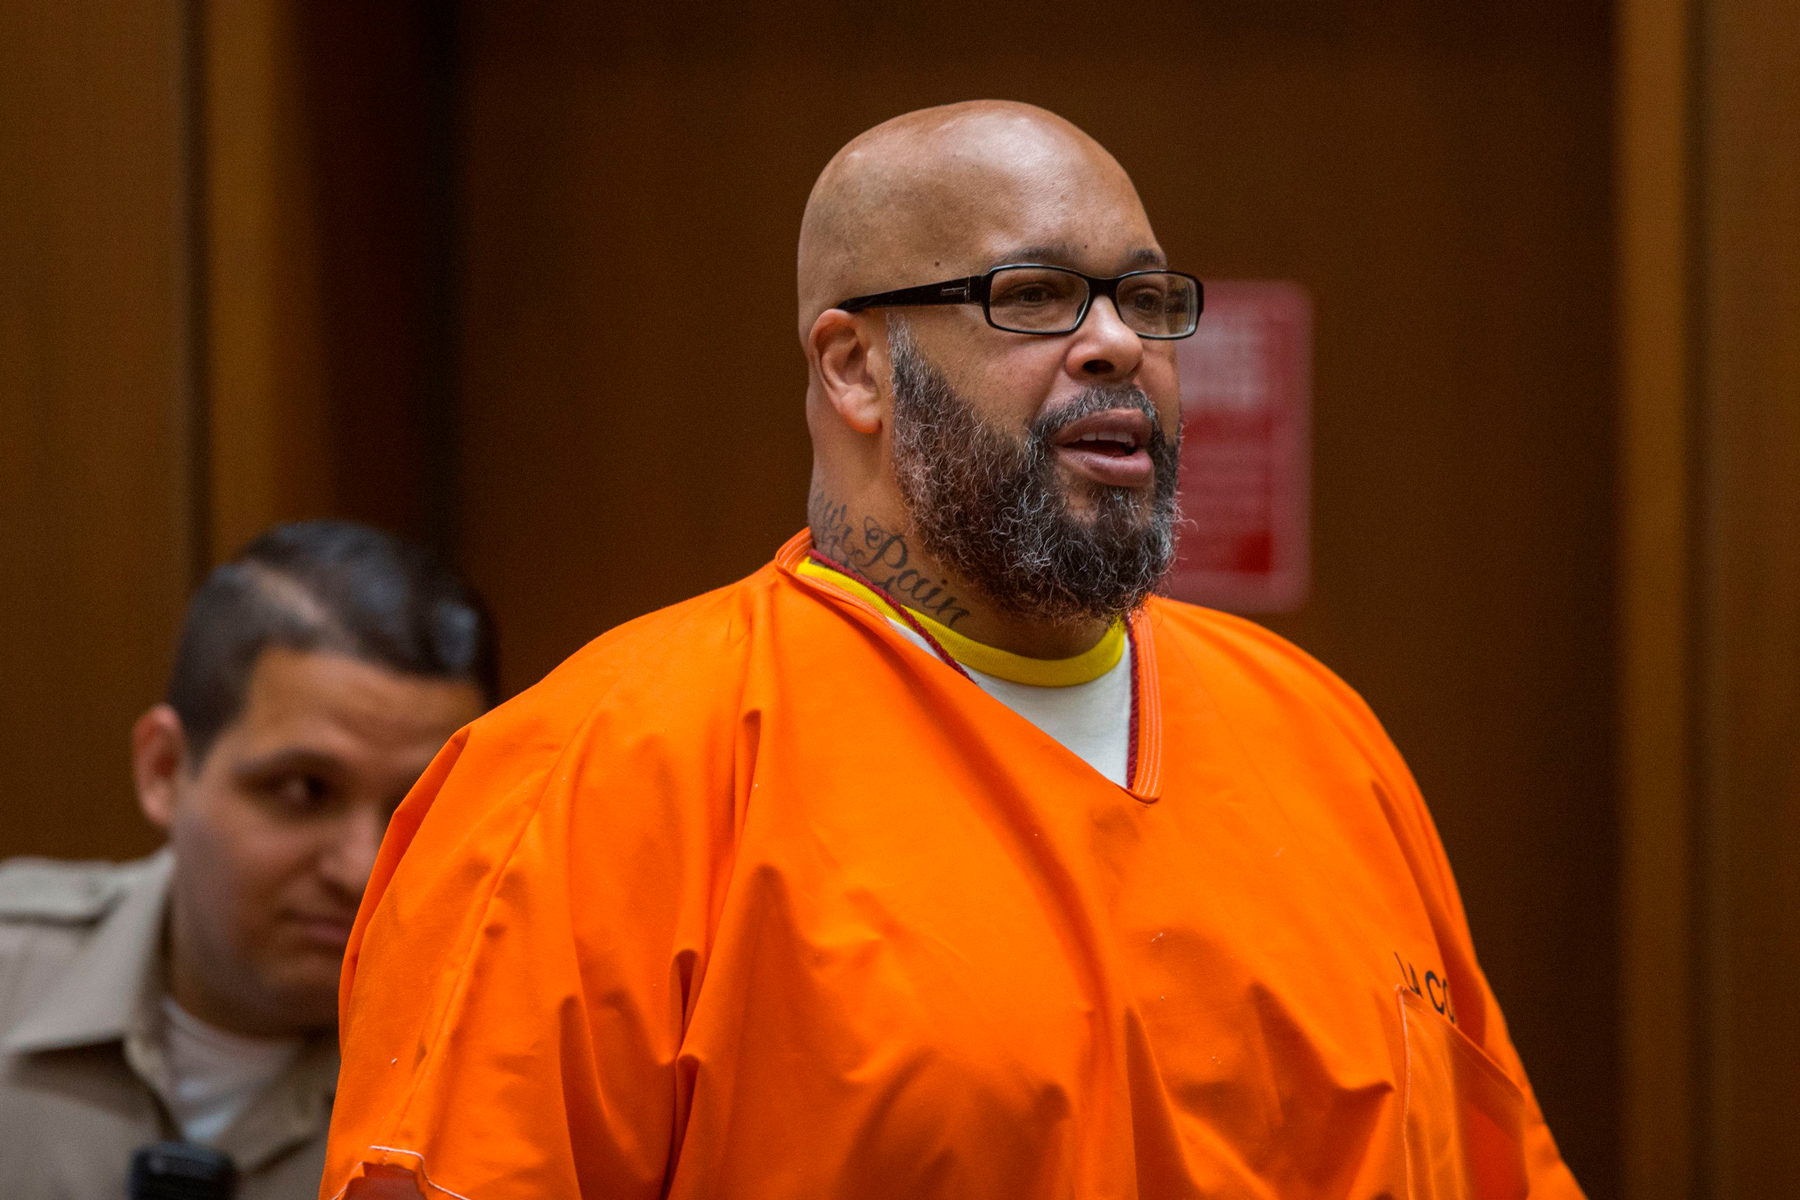 Suge Knight Should Pay $81 Million to Family of Man He Killed: Lawyer